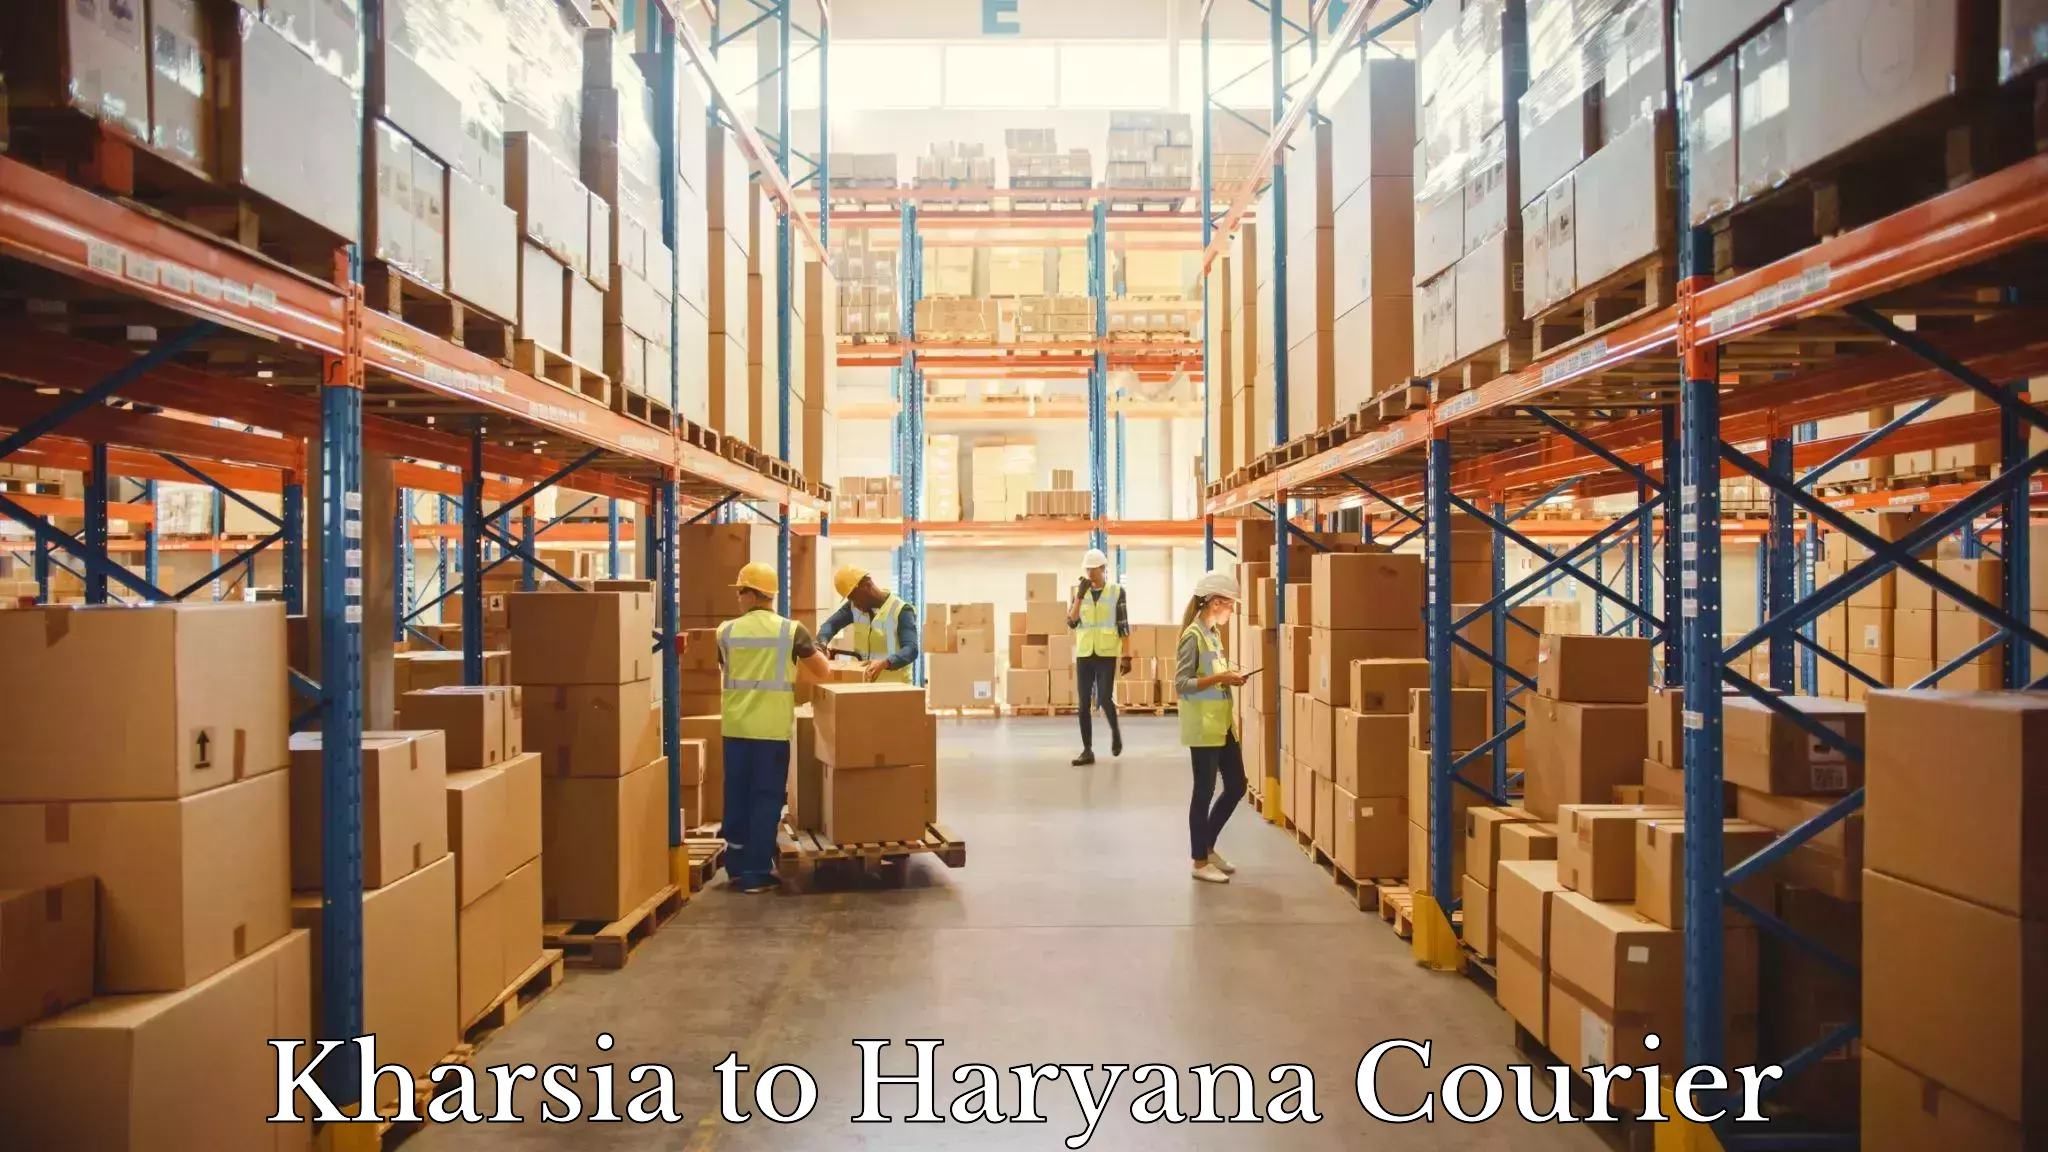 Courier service efficiency Kharsia to Chaudhary Charan Singh Haryana Agricultural University Hisar